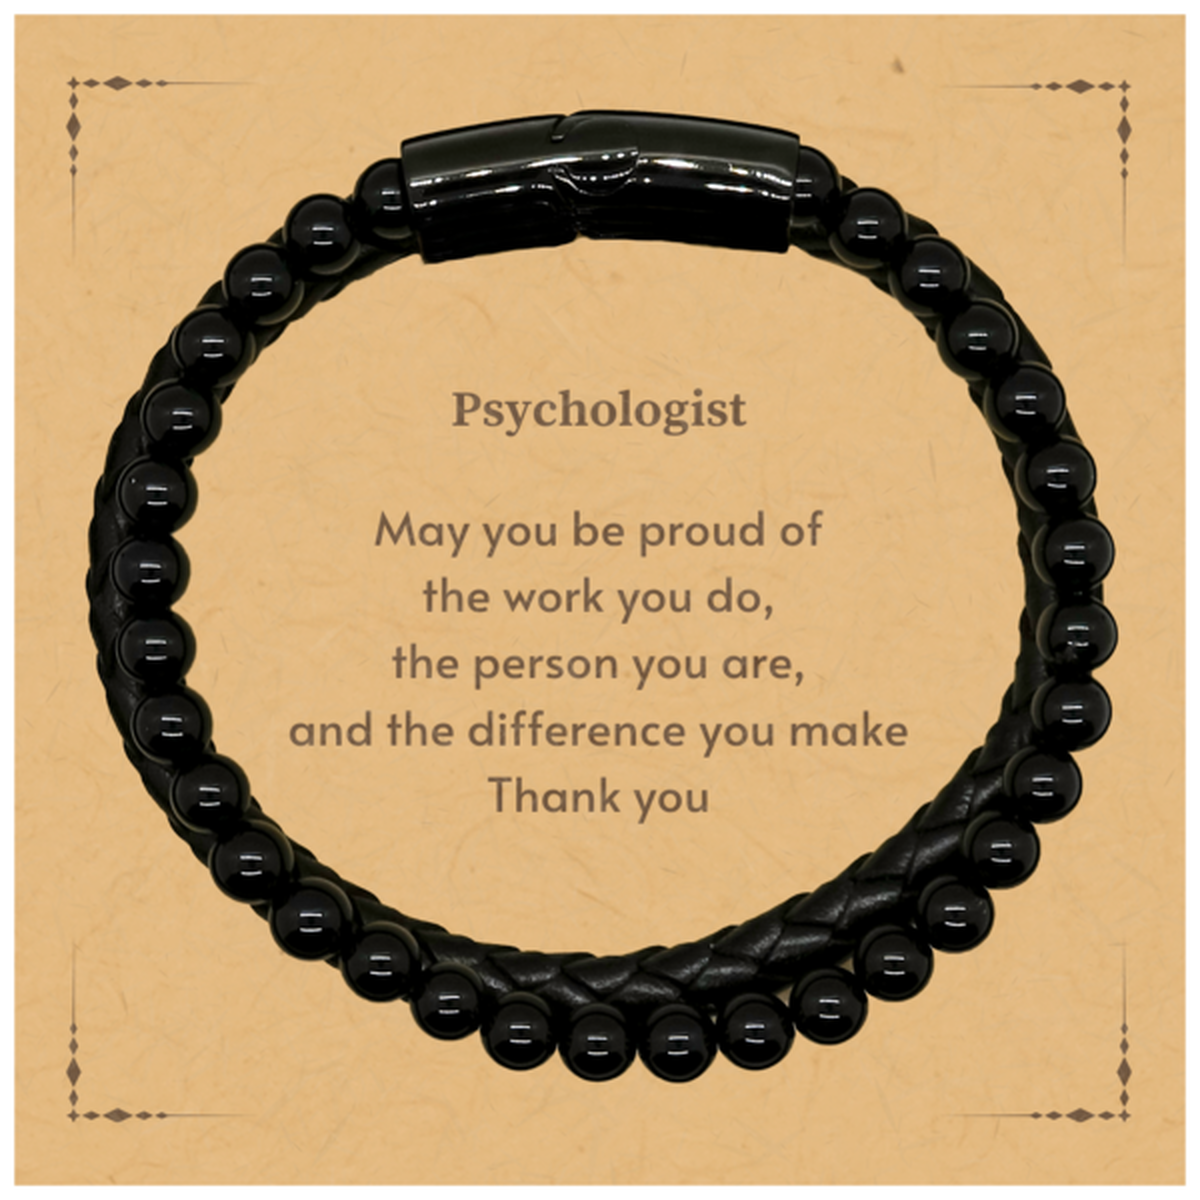 Heartwarming Stone Leather Bracelets Retirement Coworkers Gifts for Psychologist, Psychologist May You be proud of the work you do, the person you are Gifts for Boss Men Women Friends